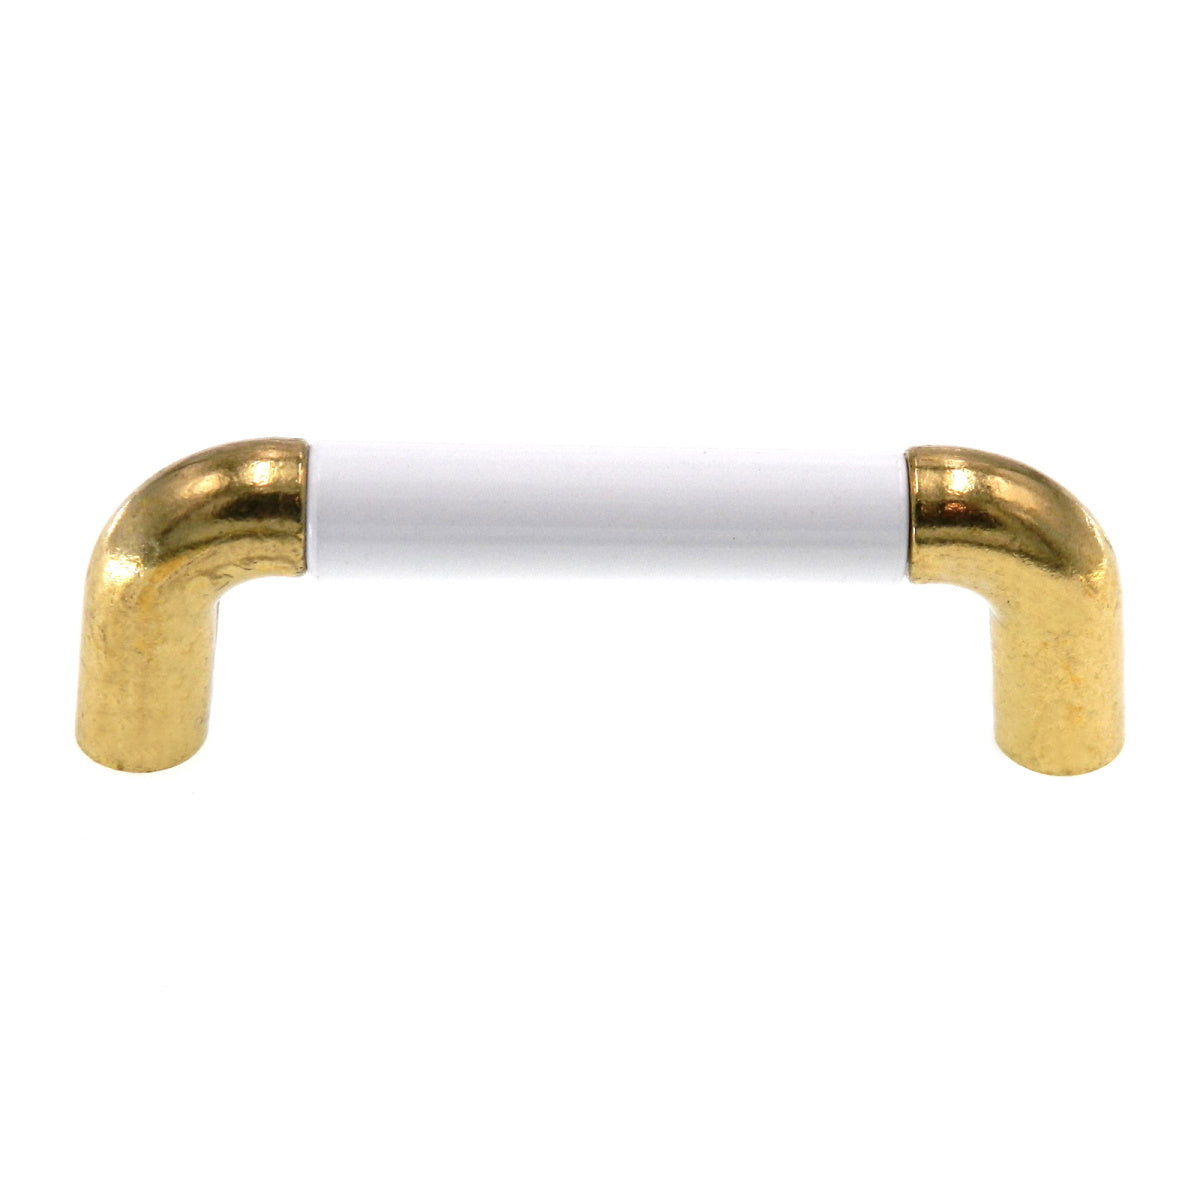 Amerock Classics Polished Brass, White 3" CTC Cabinet Handle BP76269-WH3